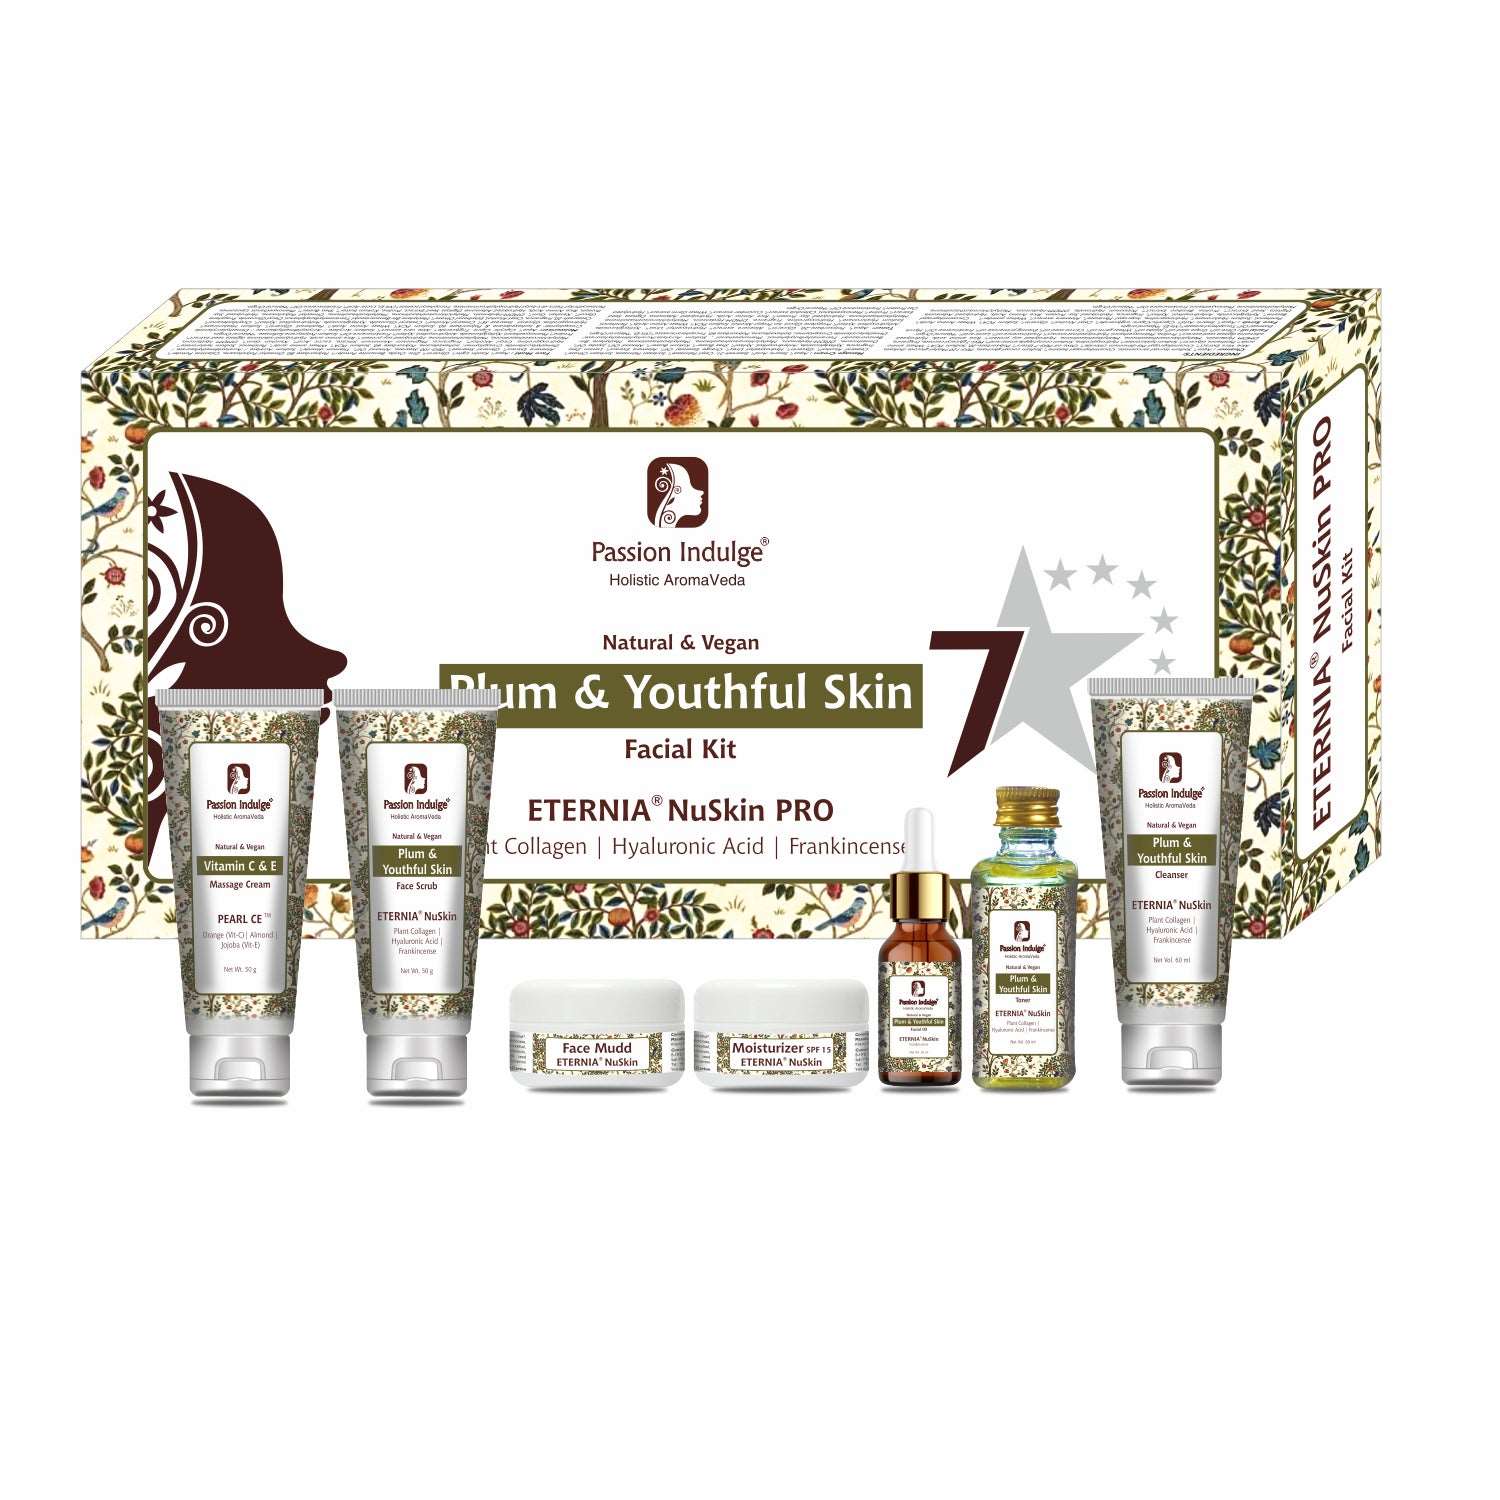 Eternia NuSkin 7 Star Pro Facial Kit For Plum & Youthful Skin With Plant Collagen, Hyaluronic Acid, Frankincense | All Skin Types | Natural & Vegan | professional Kit | ageing kit | anti ageing | everyouth | natural effect | 7 steps